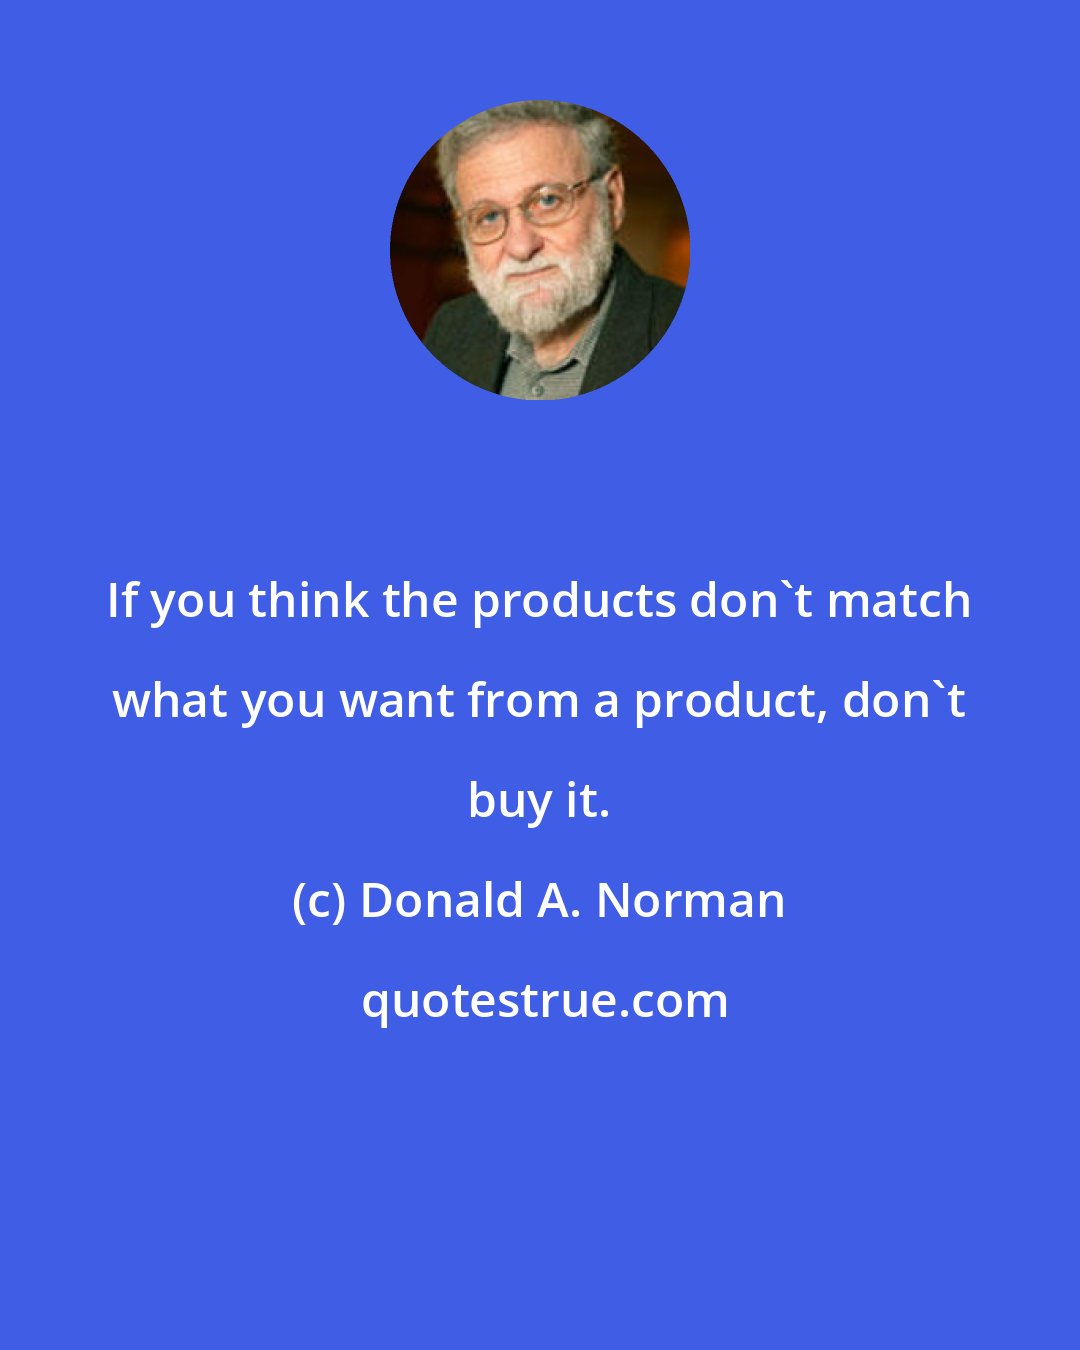 Donald A. Norman: If you think the products don't match what you want from a product, don't buy it.